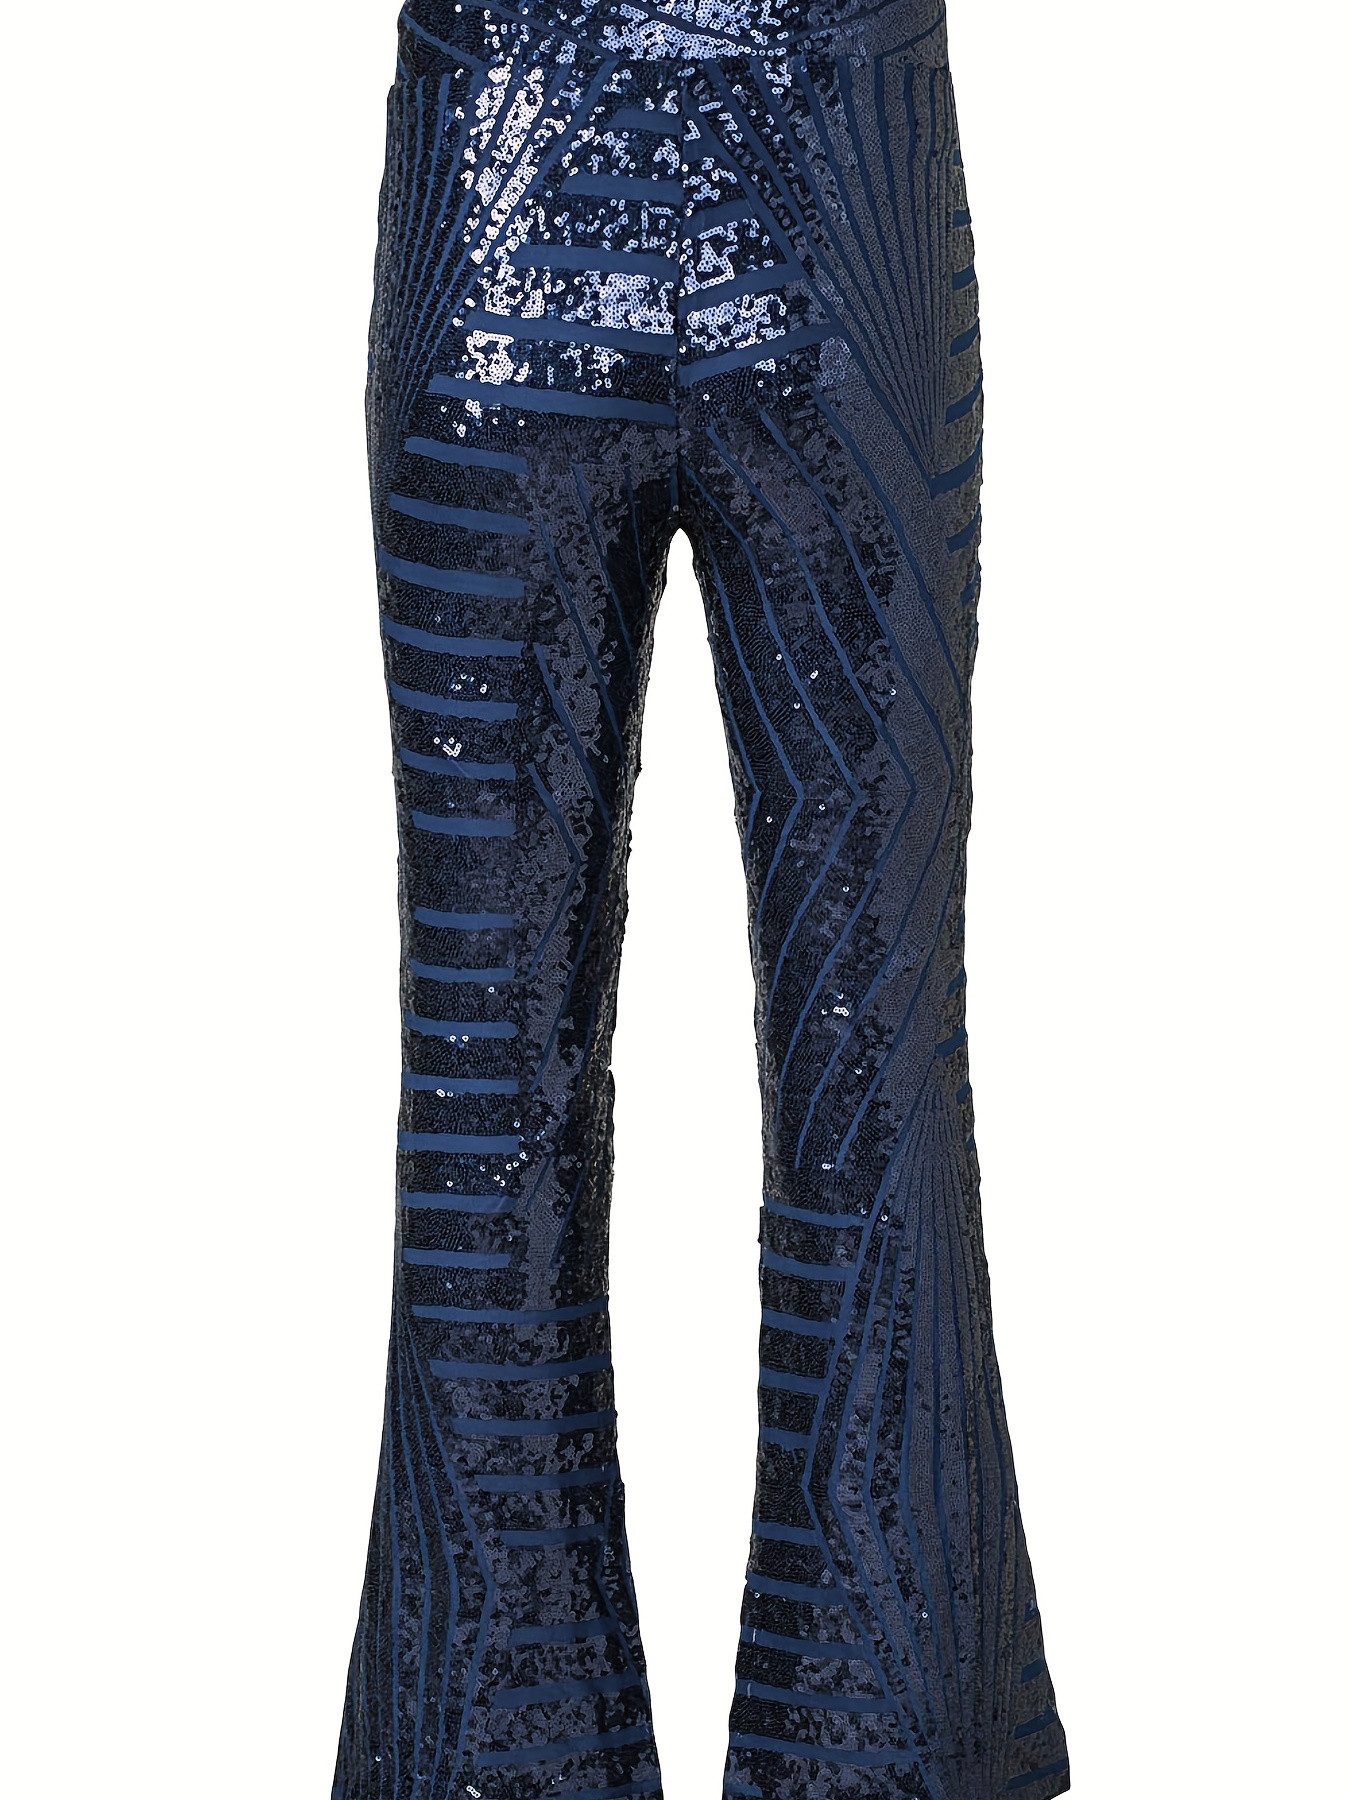 blue flares  Leggings outfit casual, Flares outfit, Flared pants